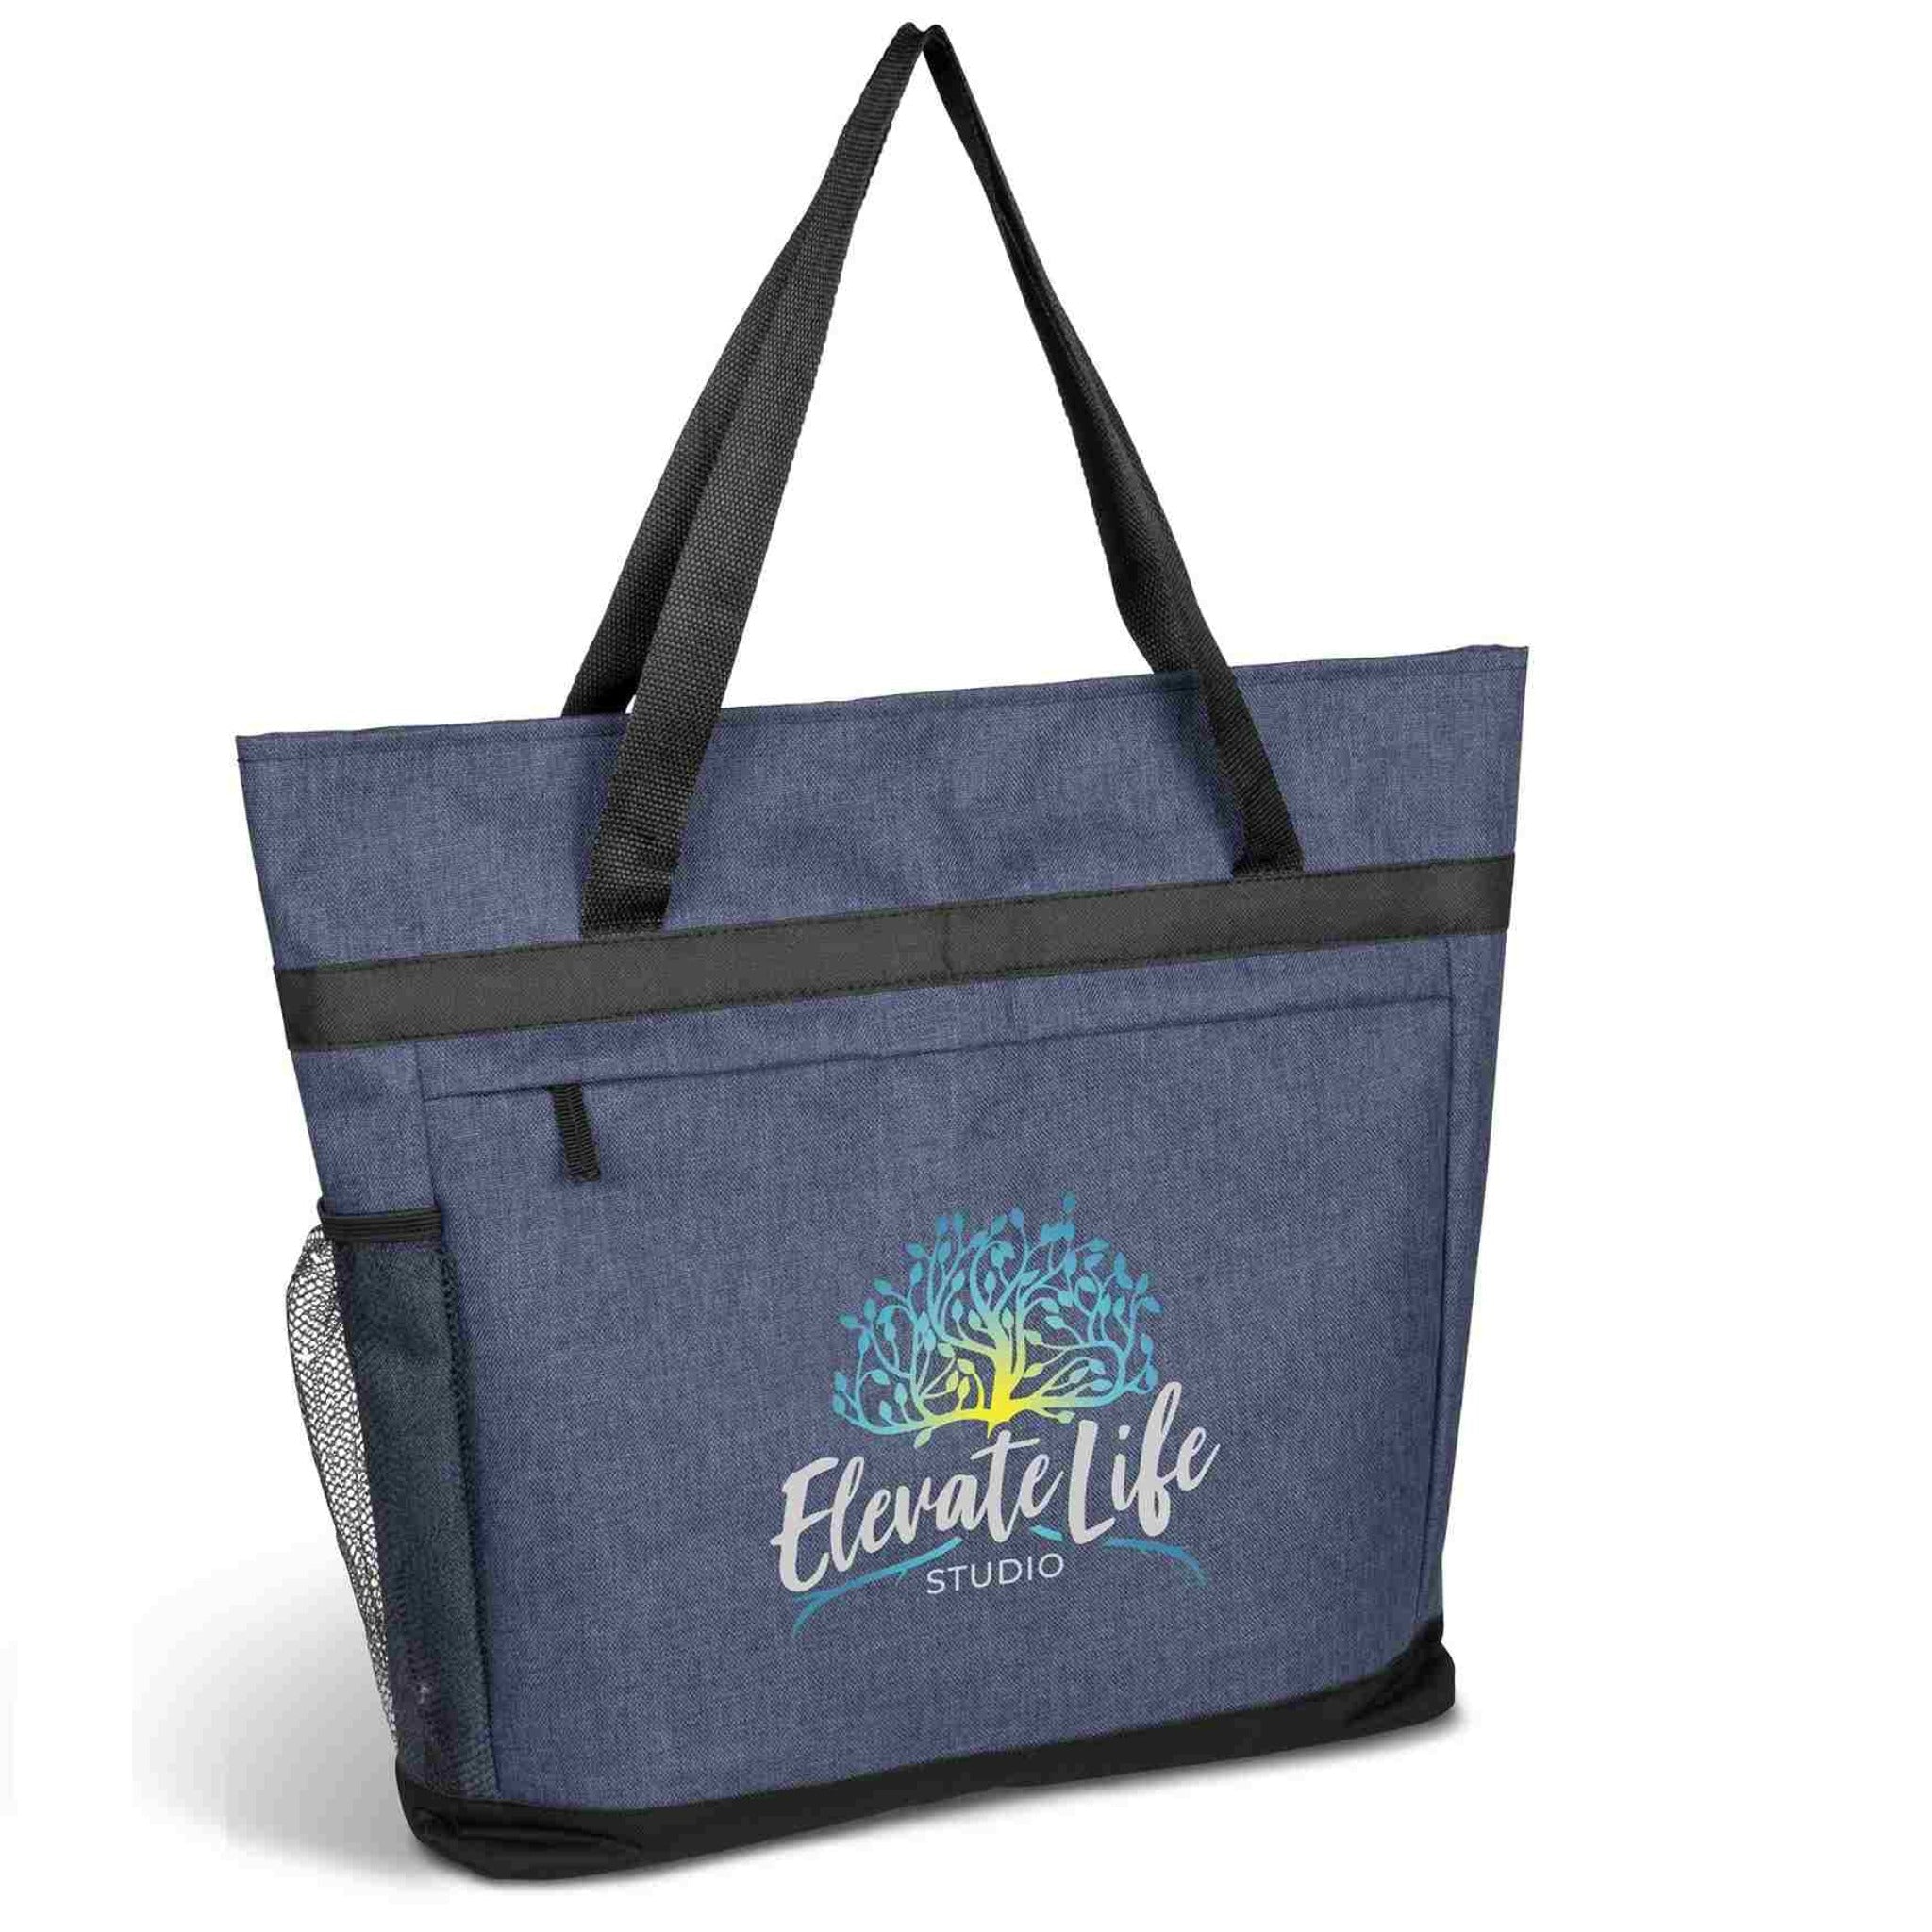 Calico Double Long Handle Conference Bag: Personalised Bags & Totes